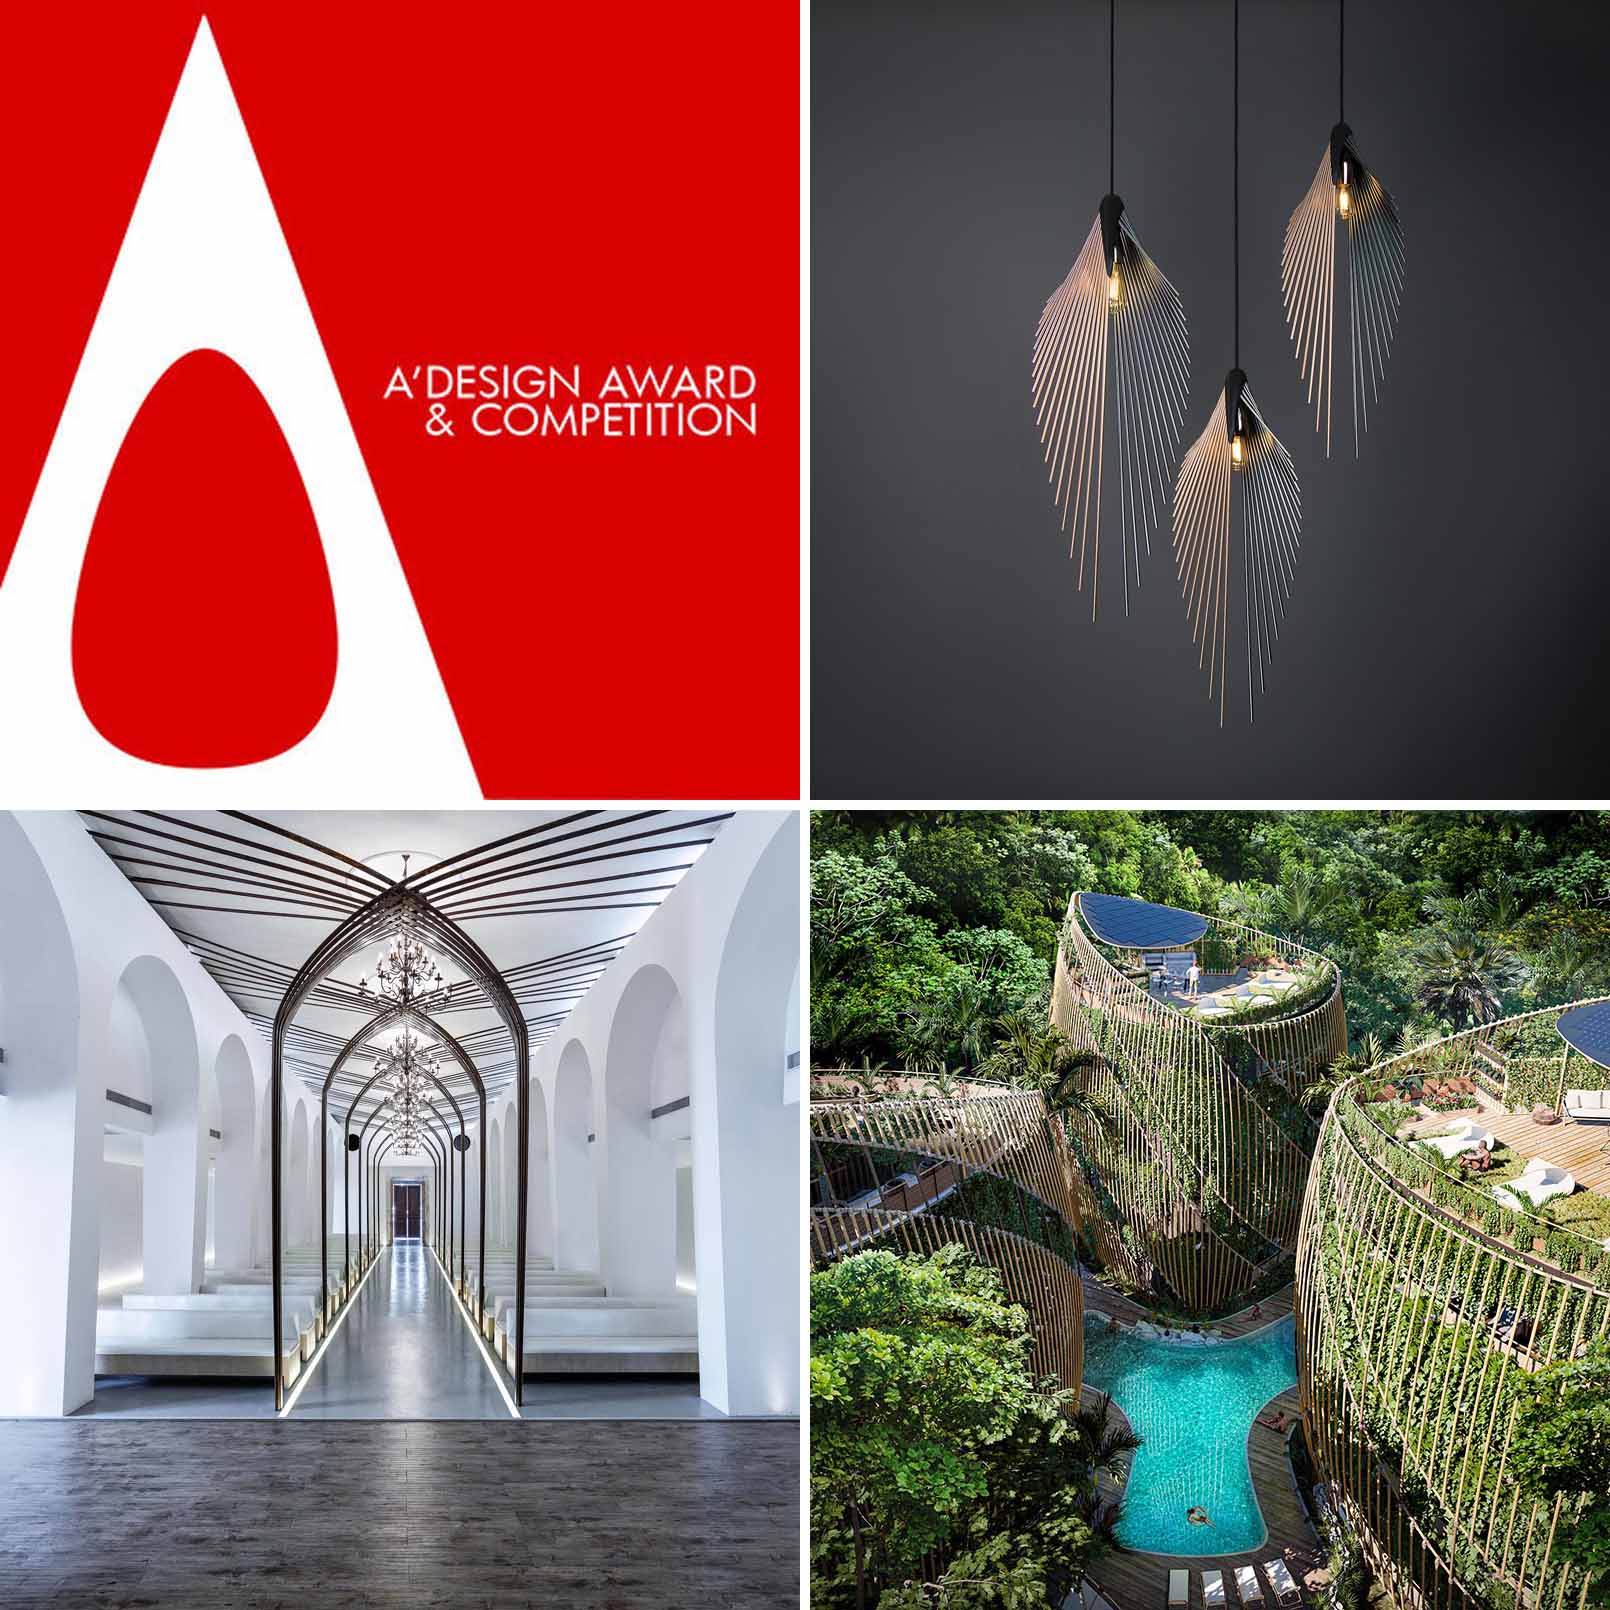 A Design Award winners from past years.